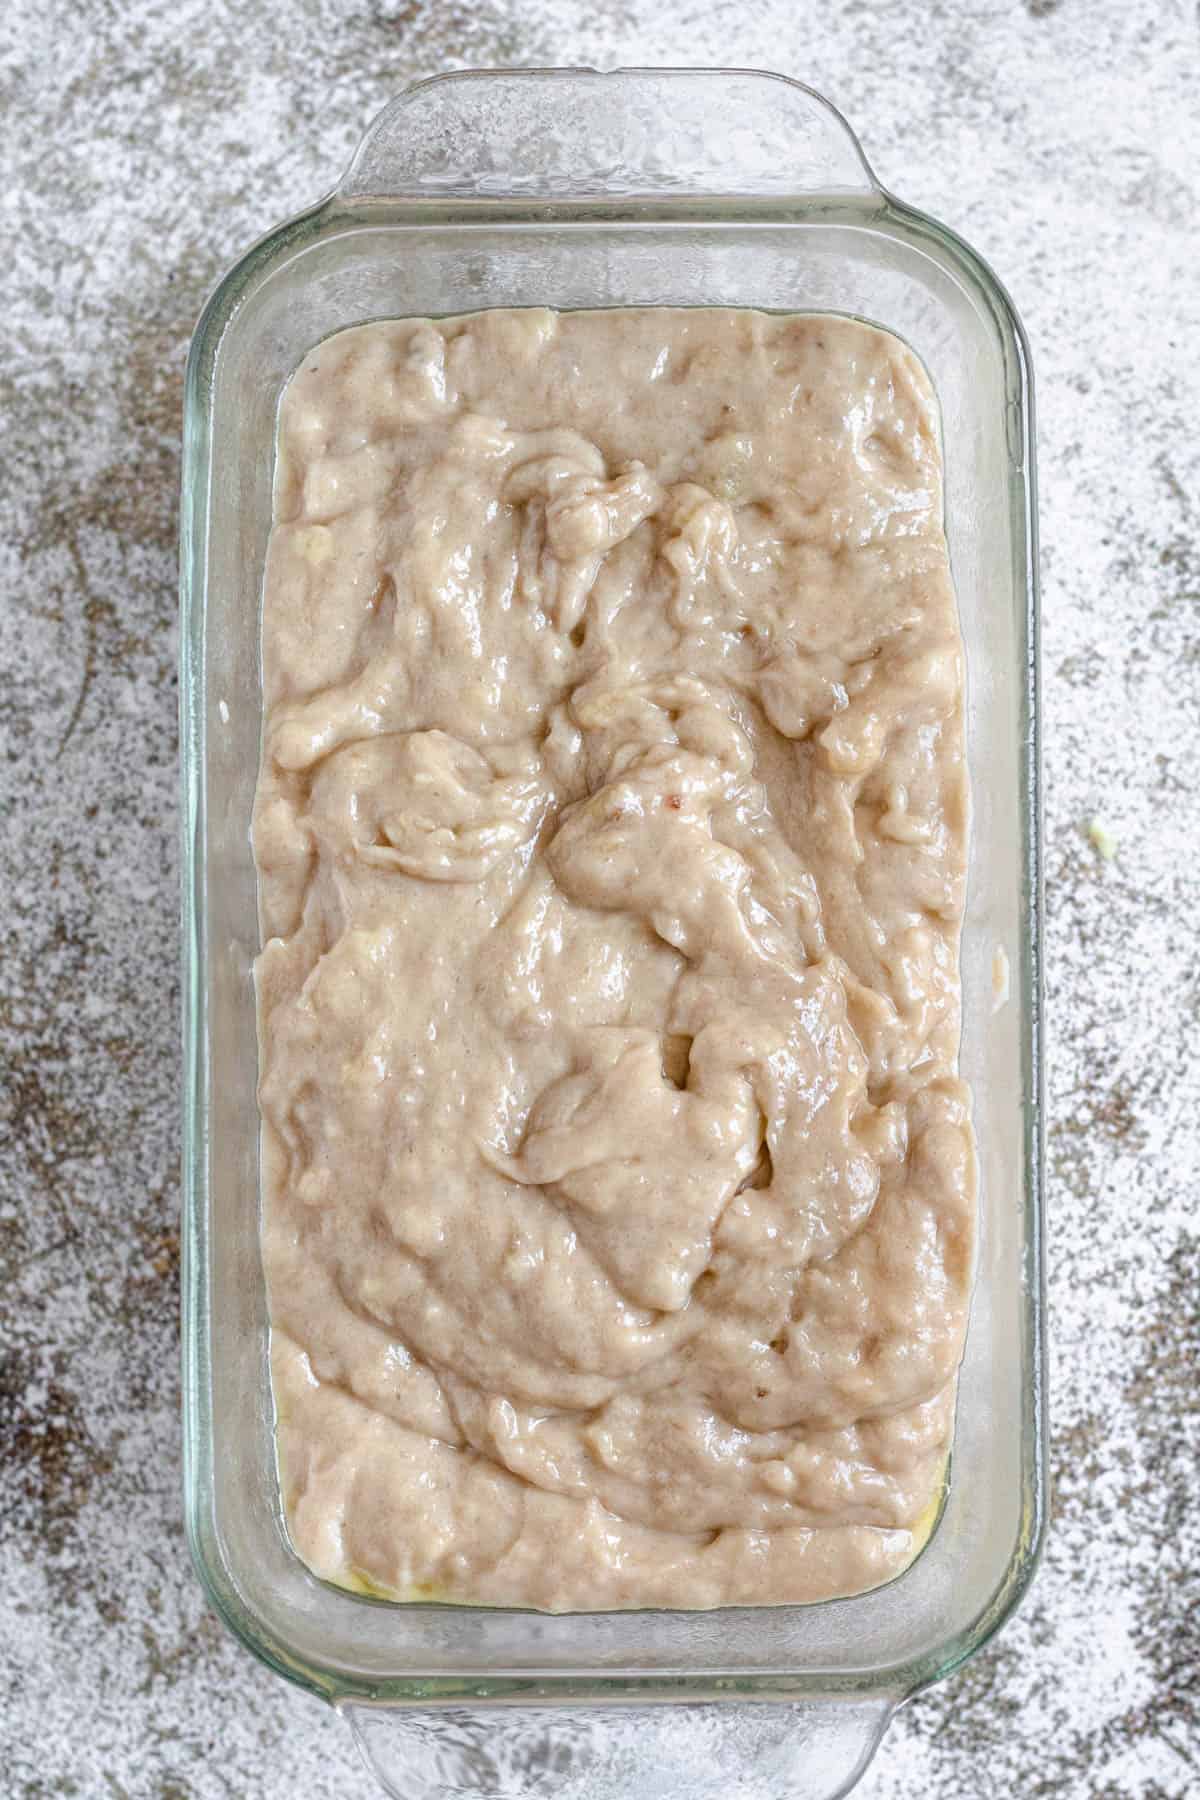 Banana bread batter in a glass loaf pan 